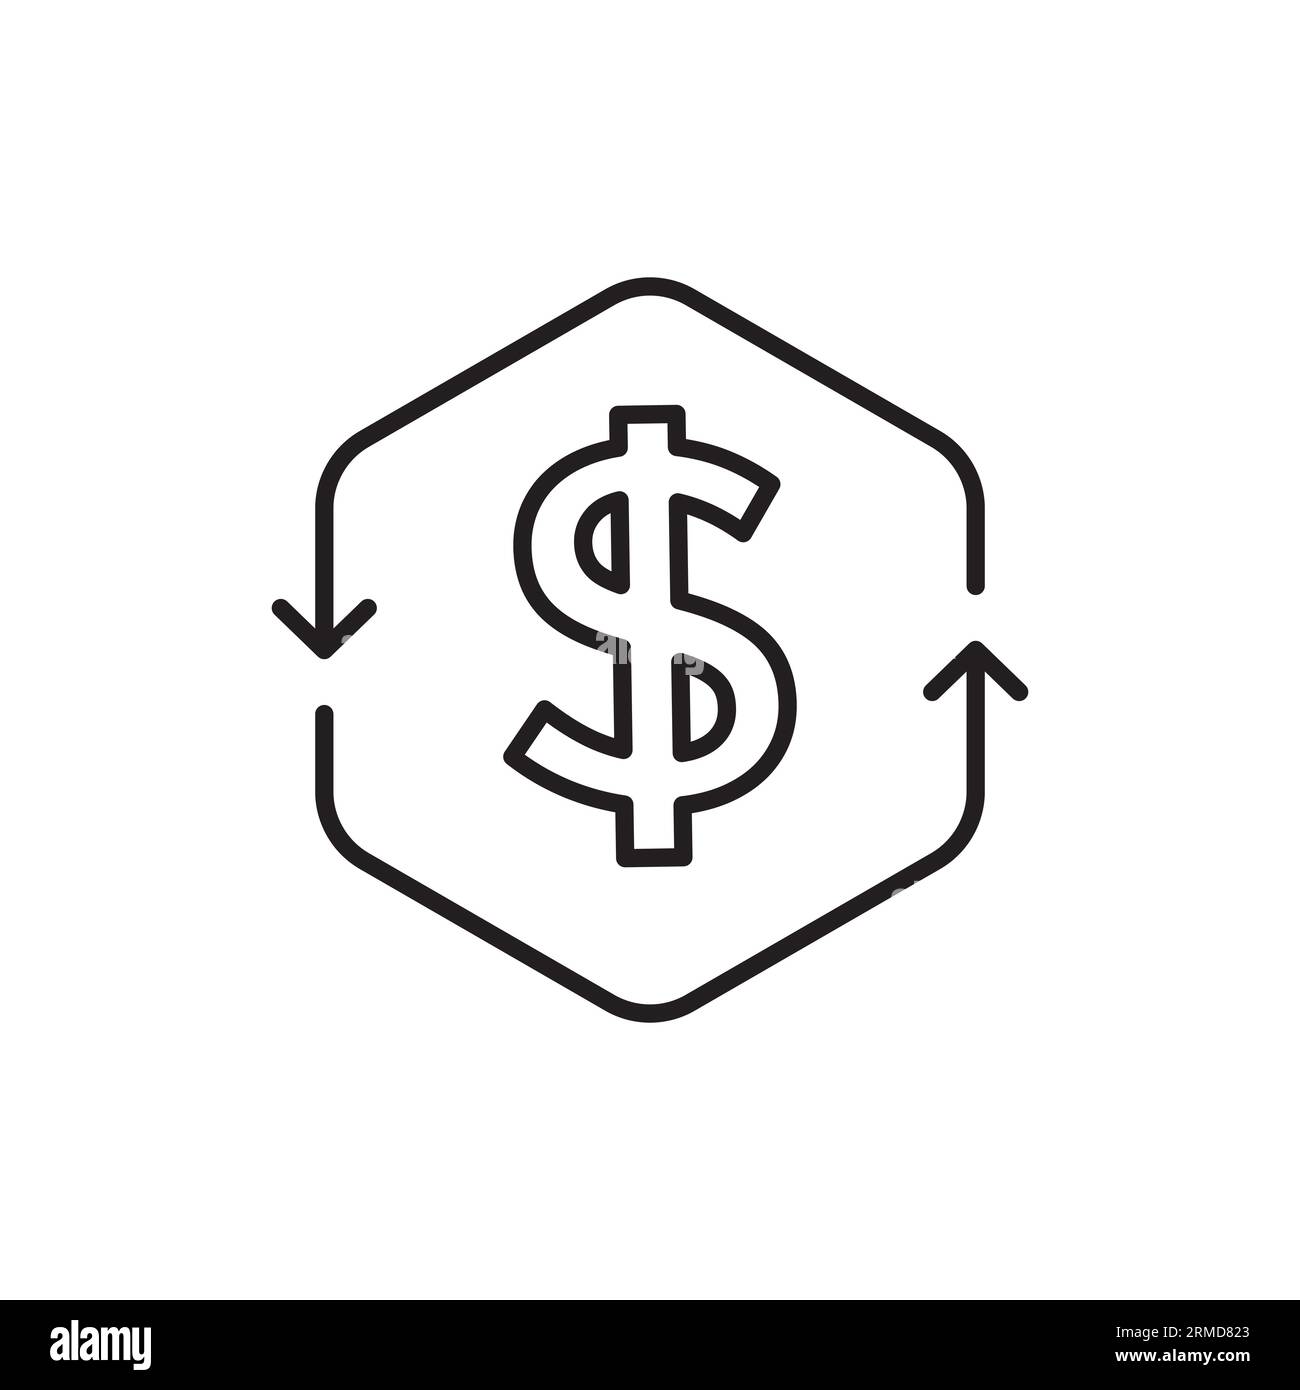 simple cash flow icon with thin line dollar sign. flat stroke trend modern lineart cashflow logotype graphic design isolated on white background. conc Stock Vector